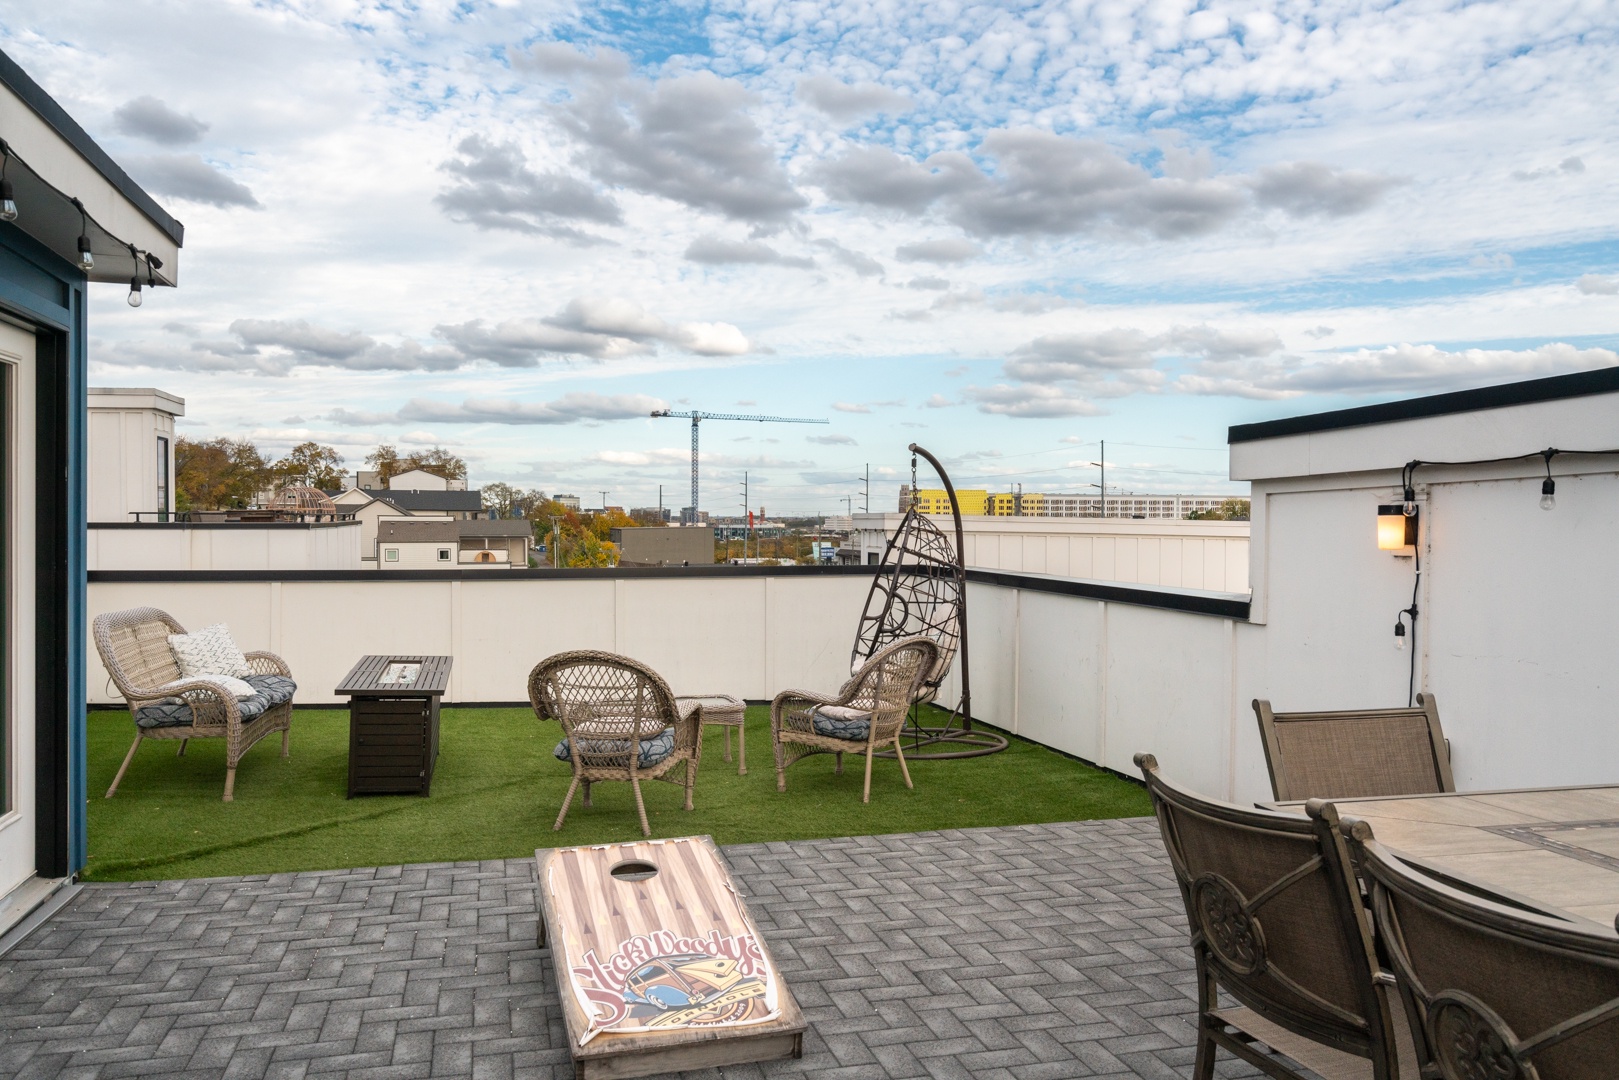 There is fun for all on the spacious rooftop deck